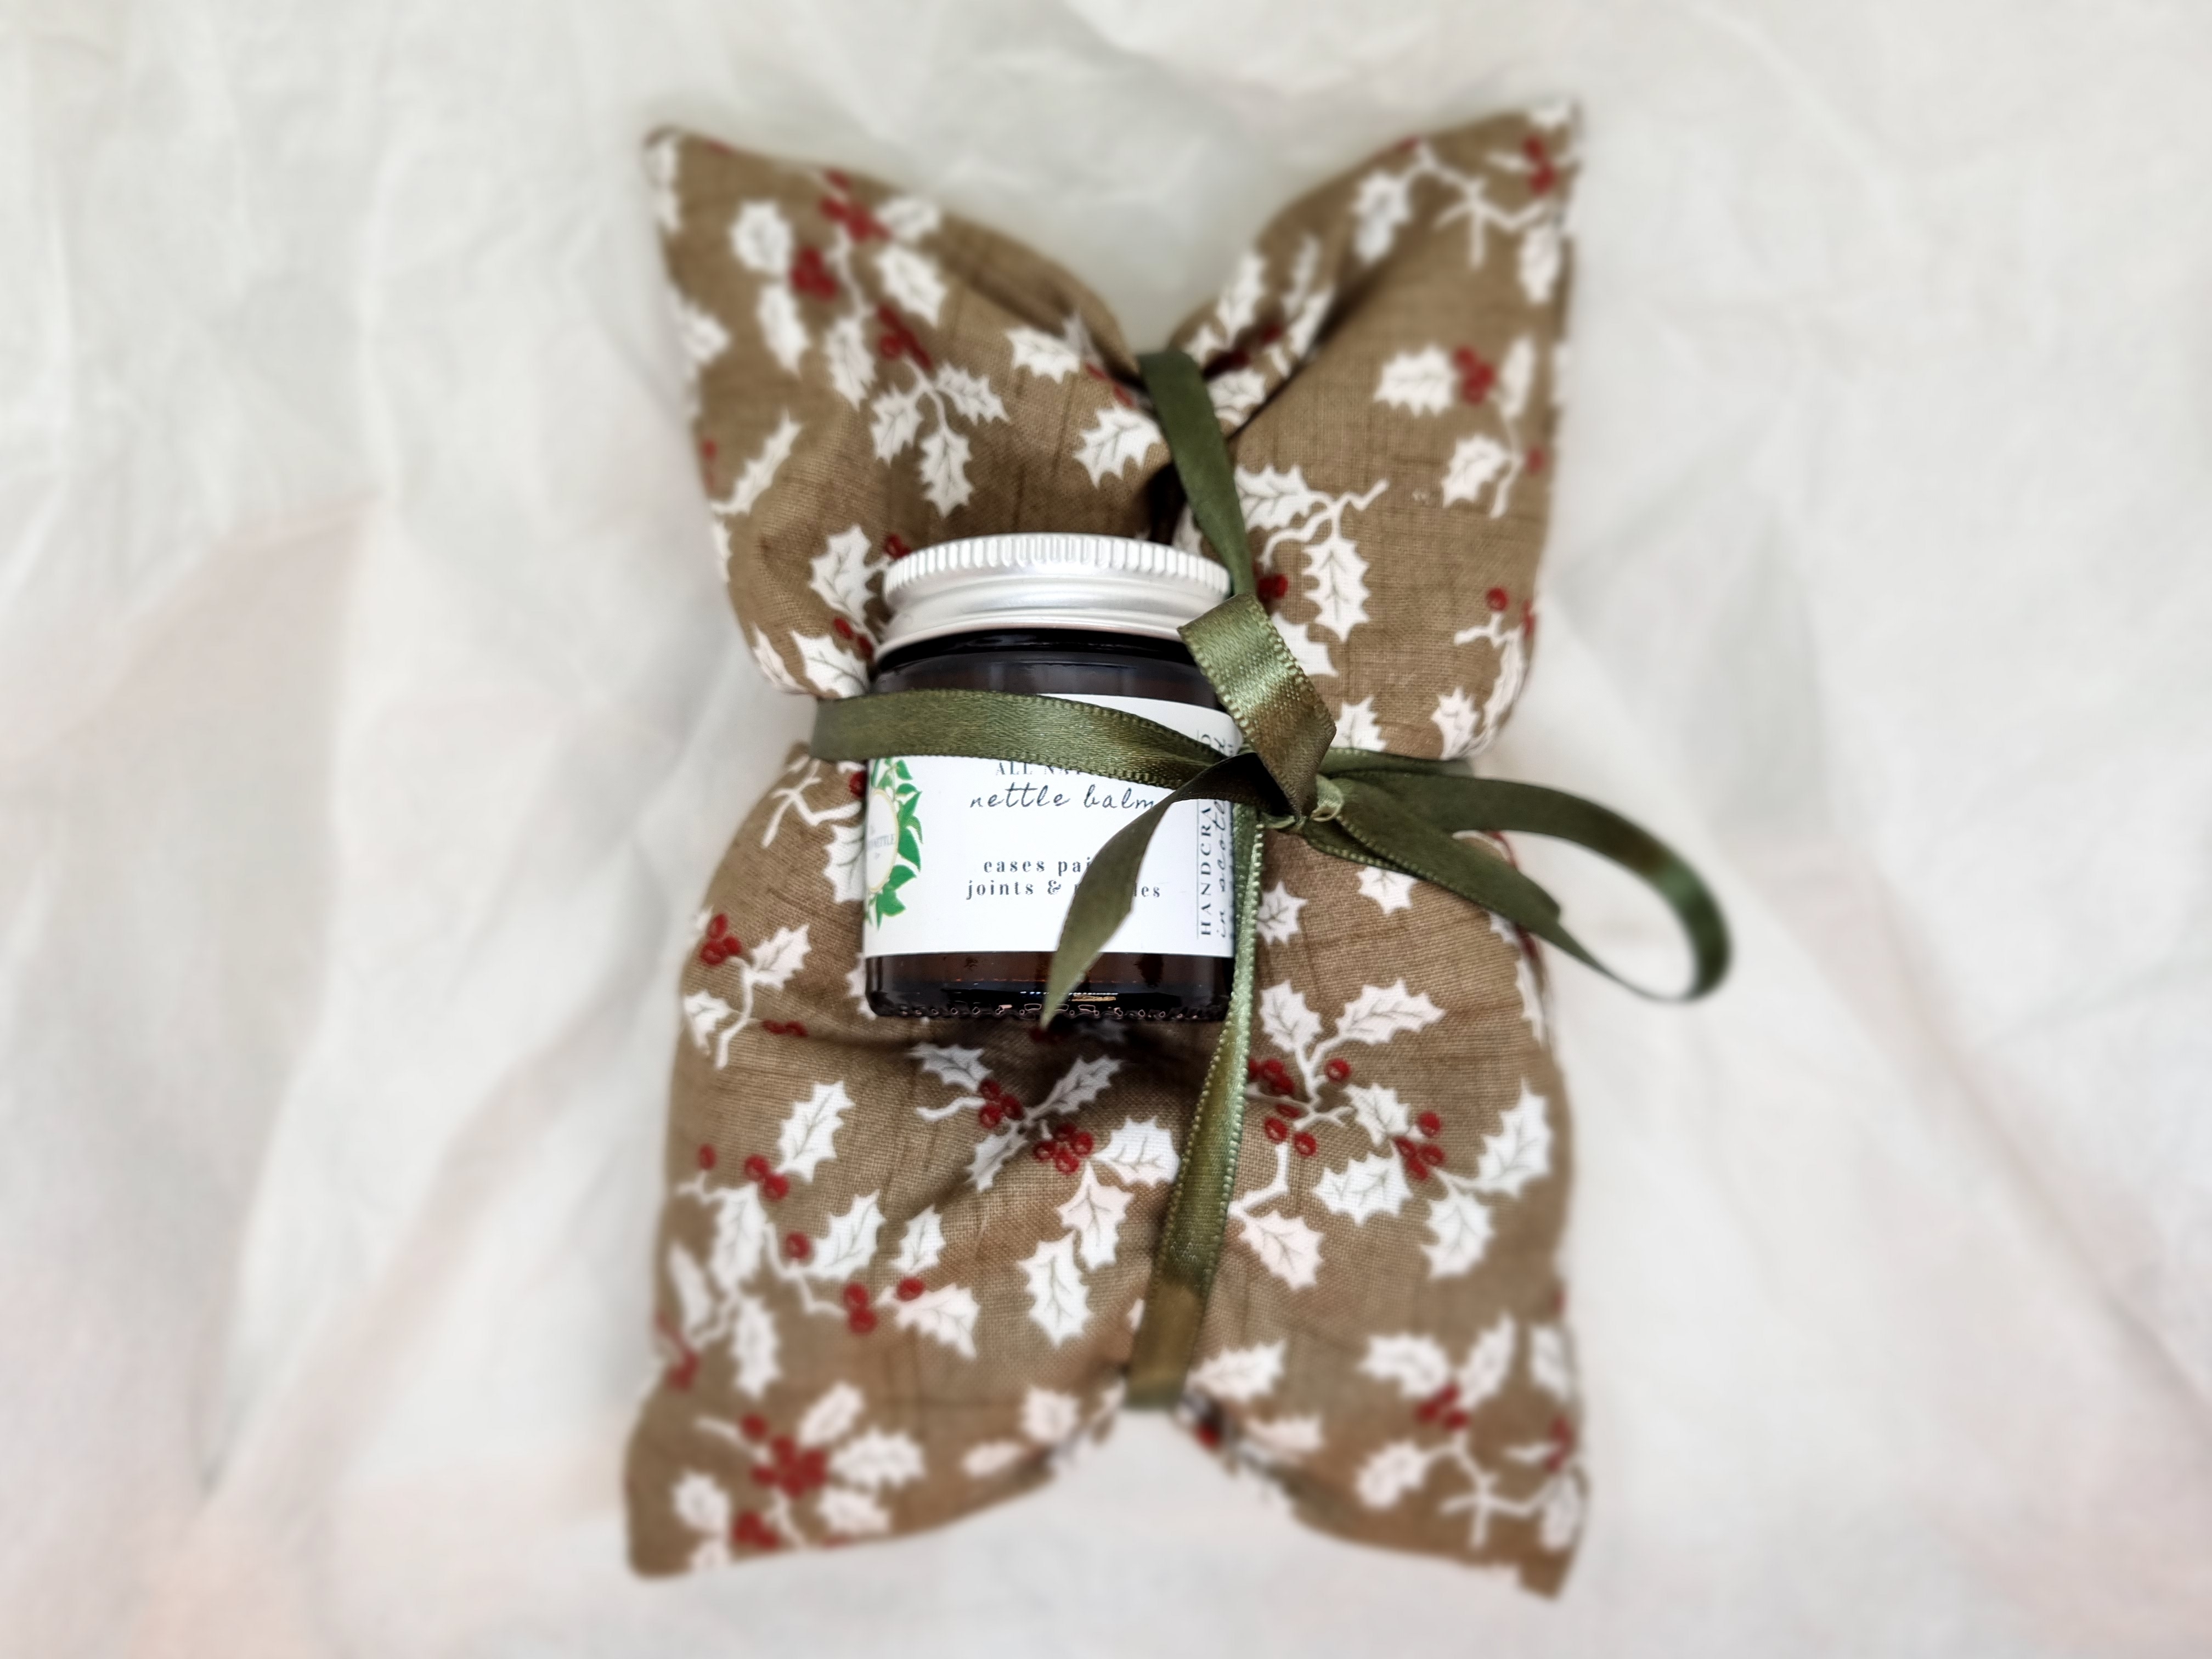 Pain Relief Heat Pads (and Cool Packs) – Festive Holly – With 30ml Nettle Balm – The Wild Nettle Co